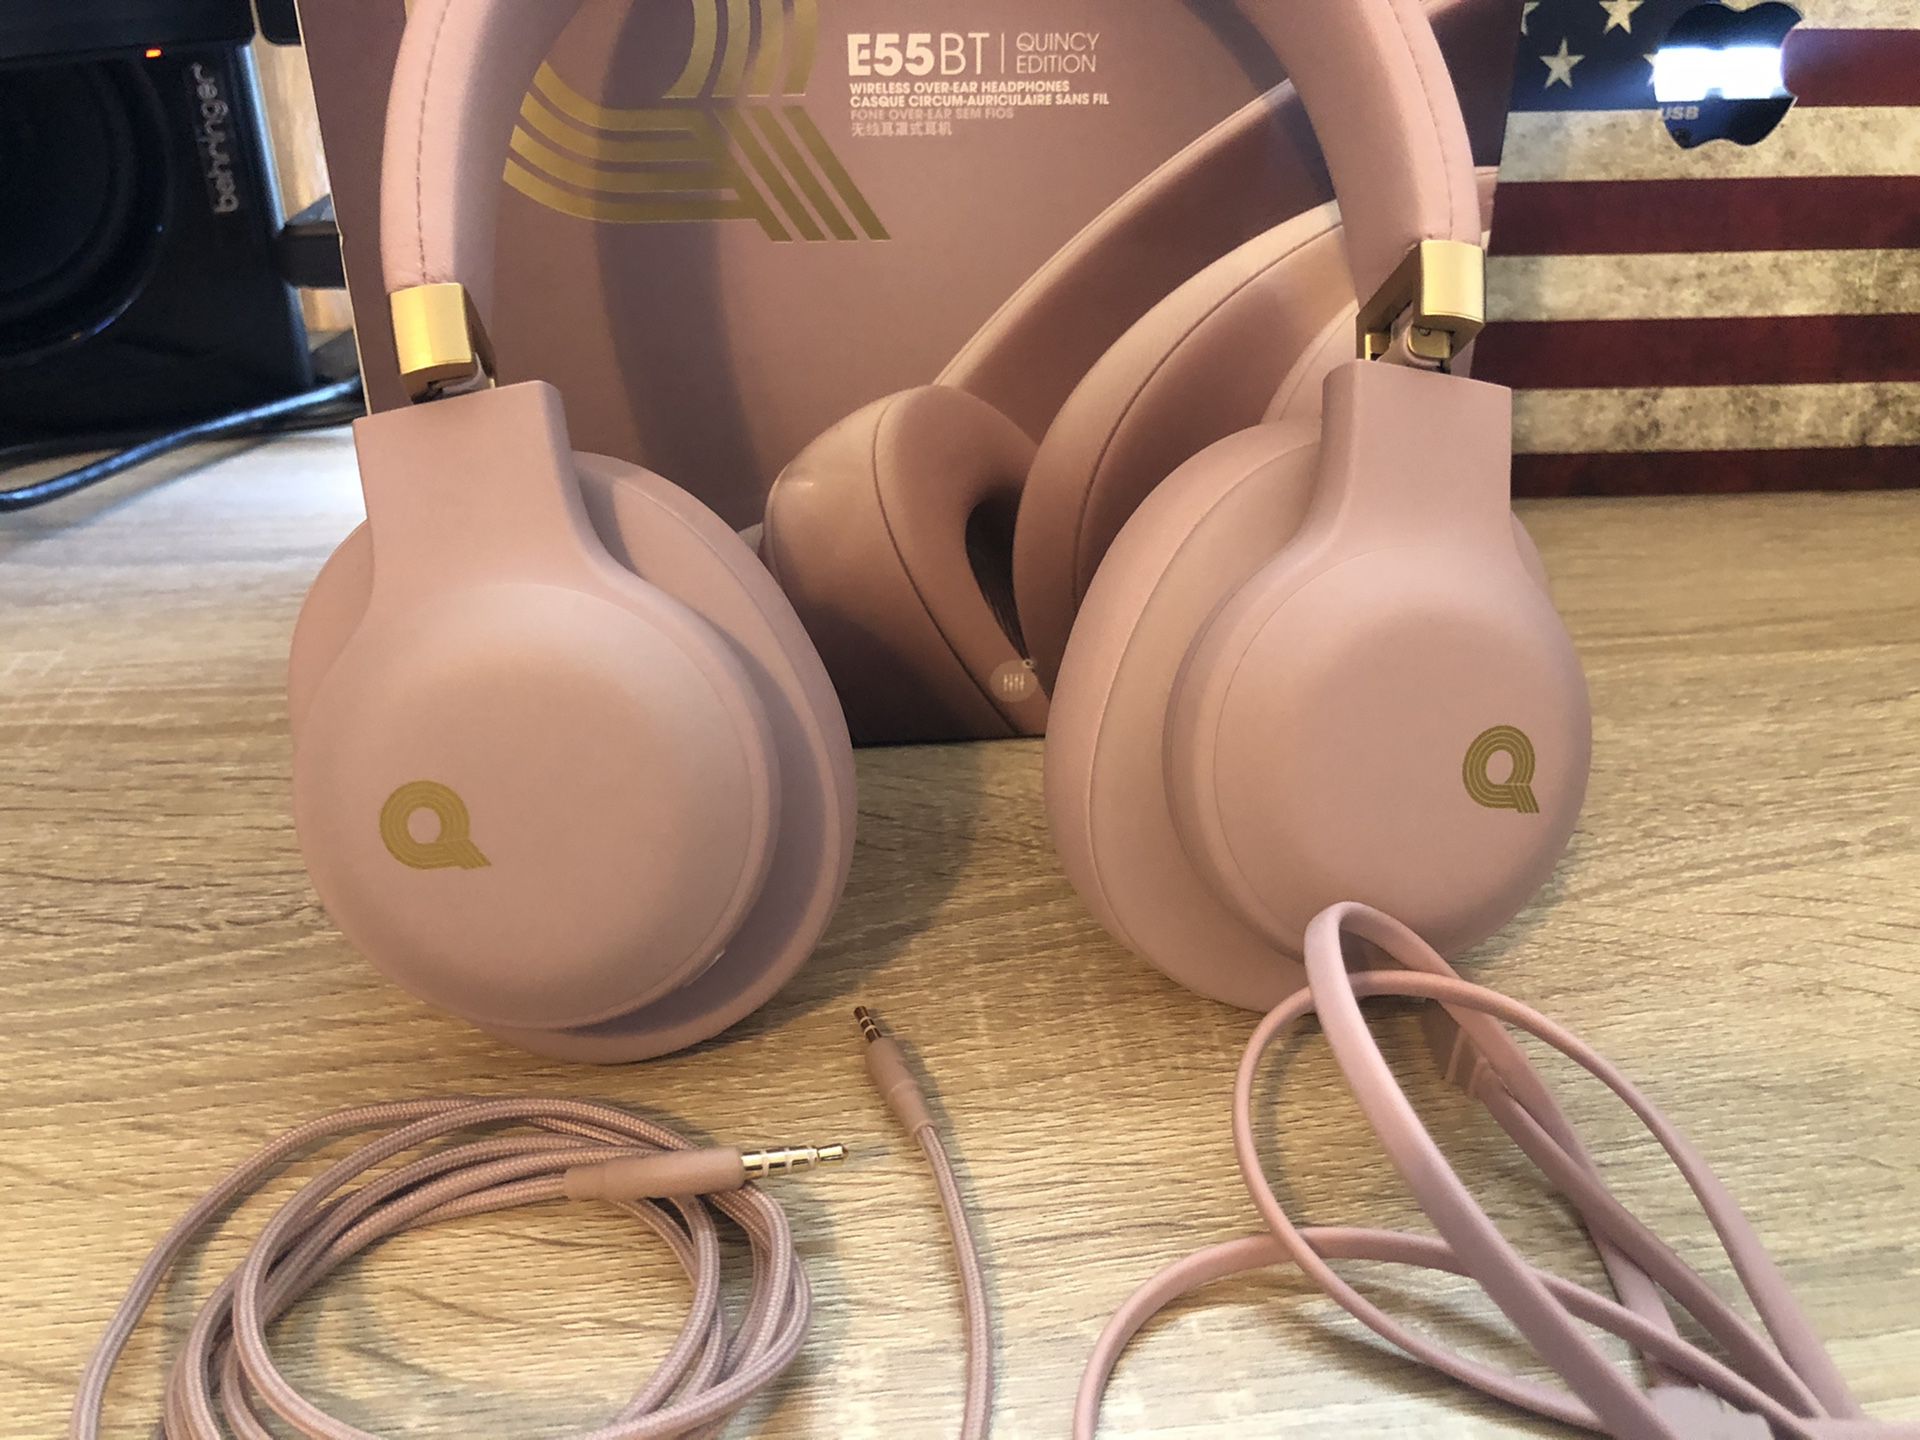 JBL E55BT Quincy Edition Wireless Over-Ear Headphones with One-Button Remote and Mic (Gold pink